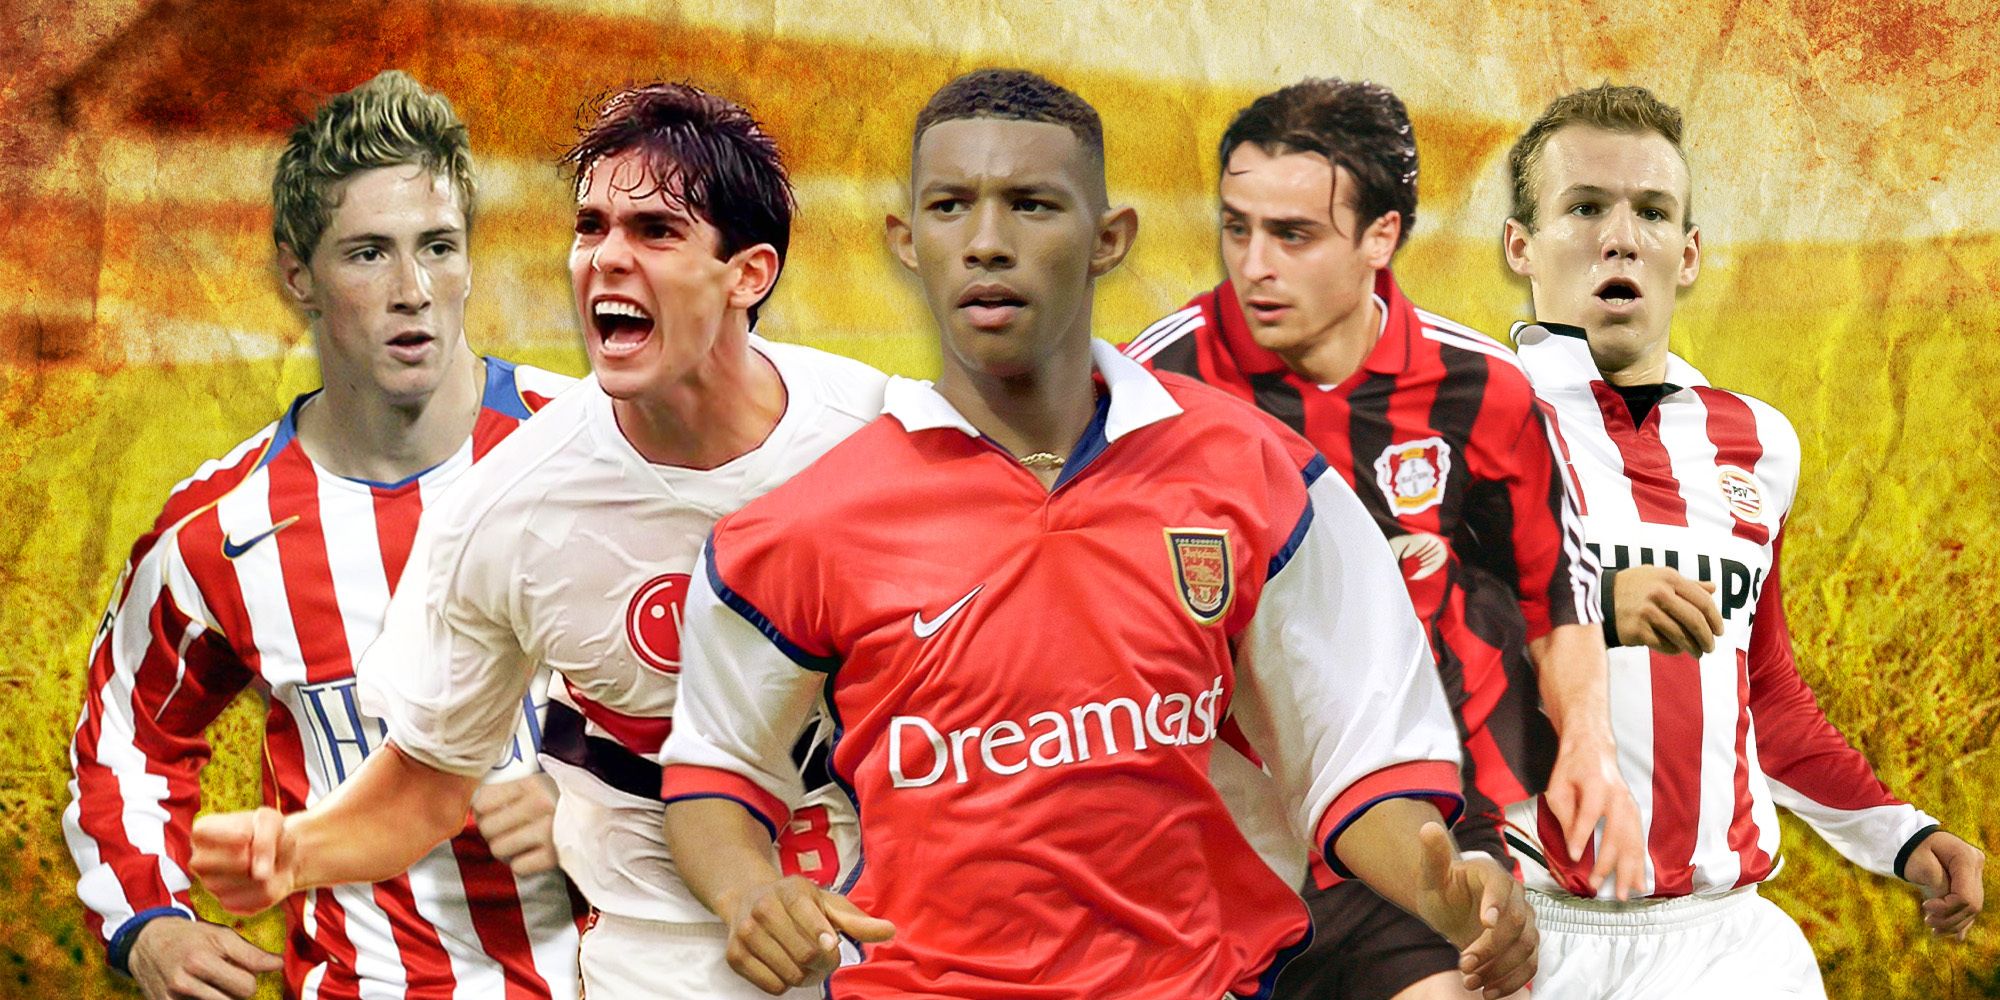 EPL_Young players 2001-1